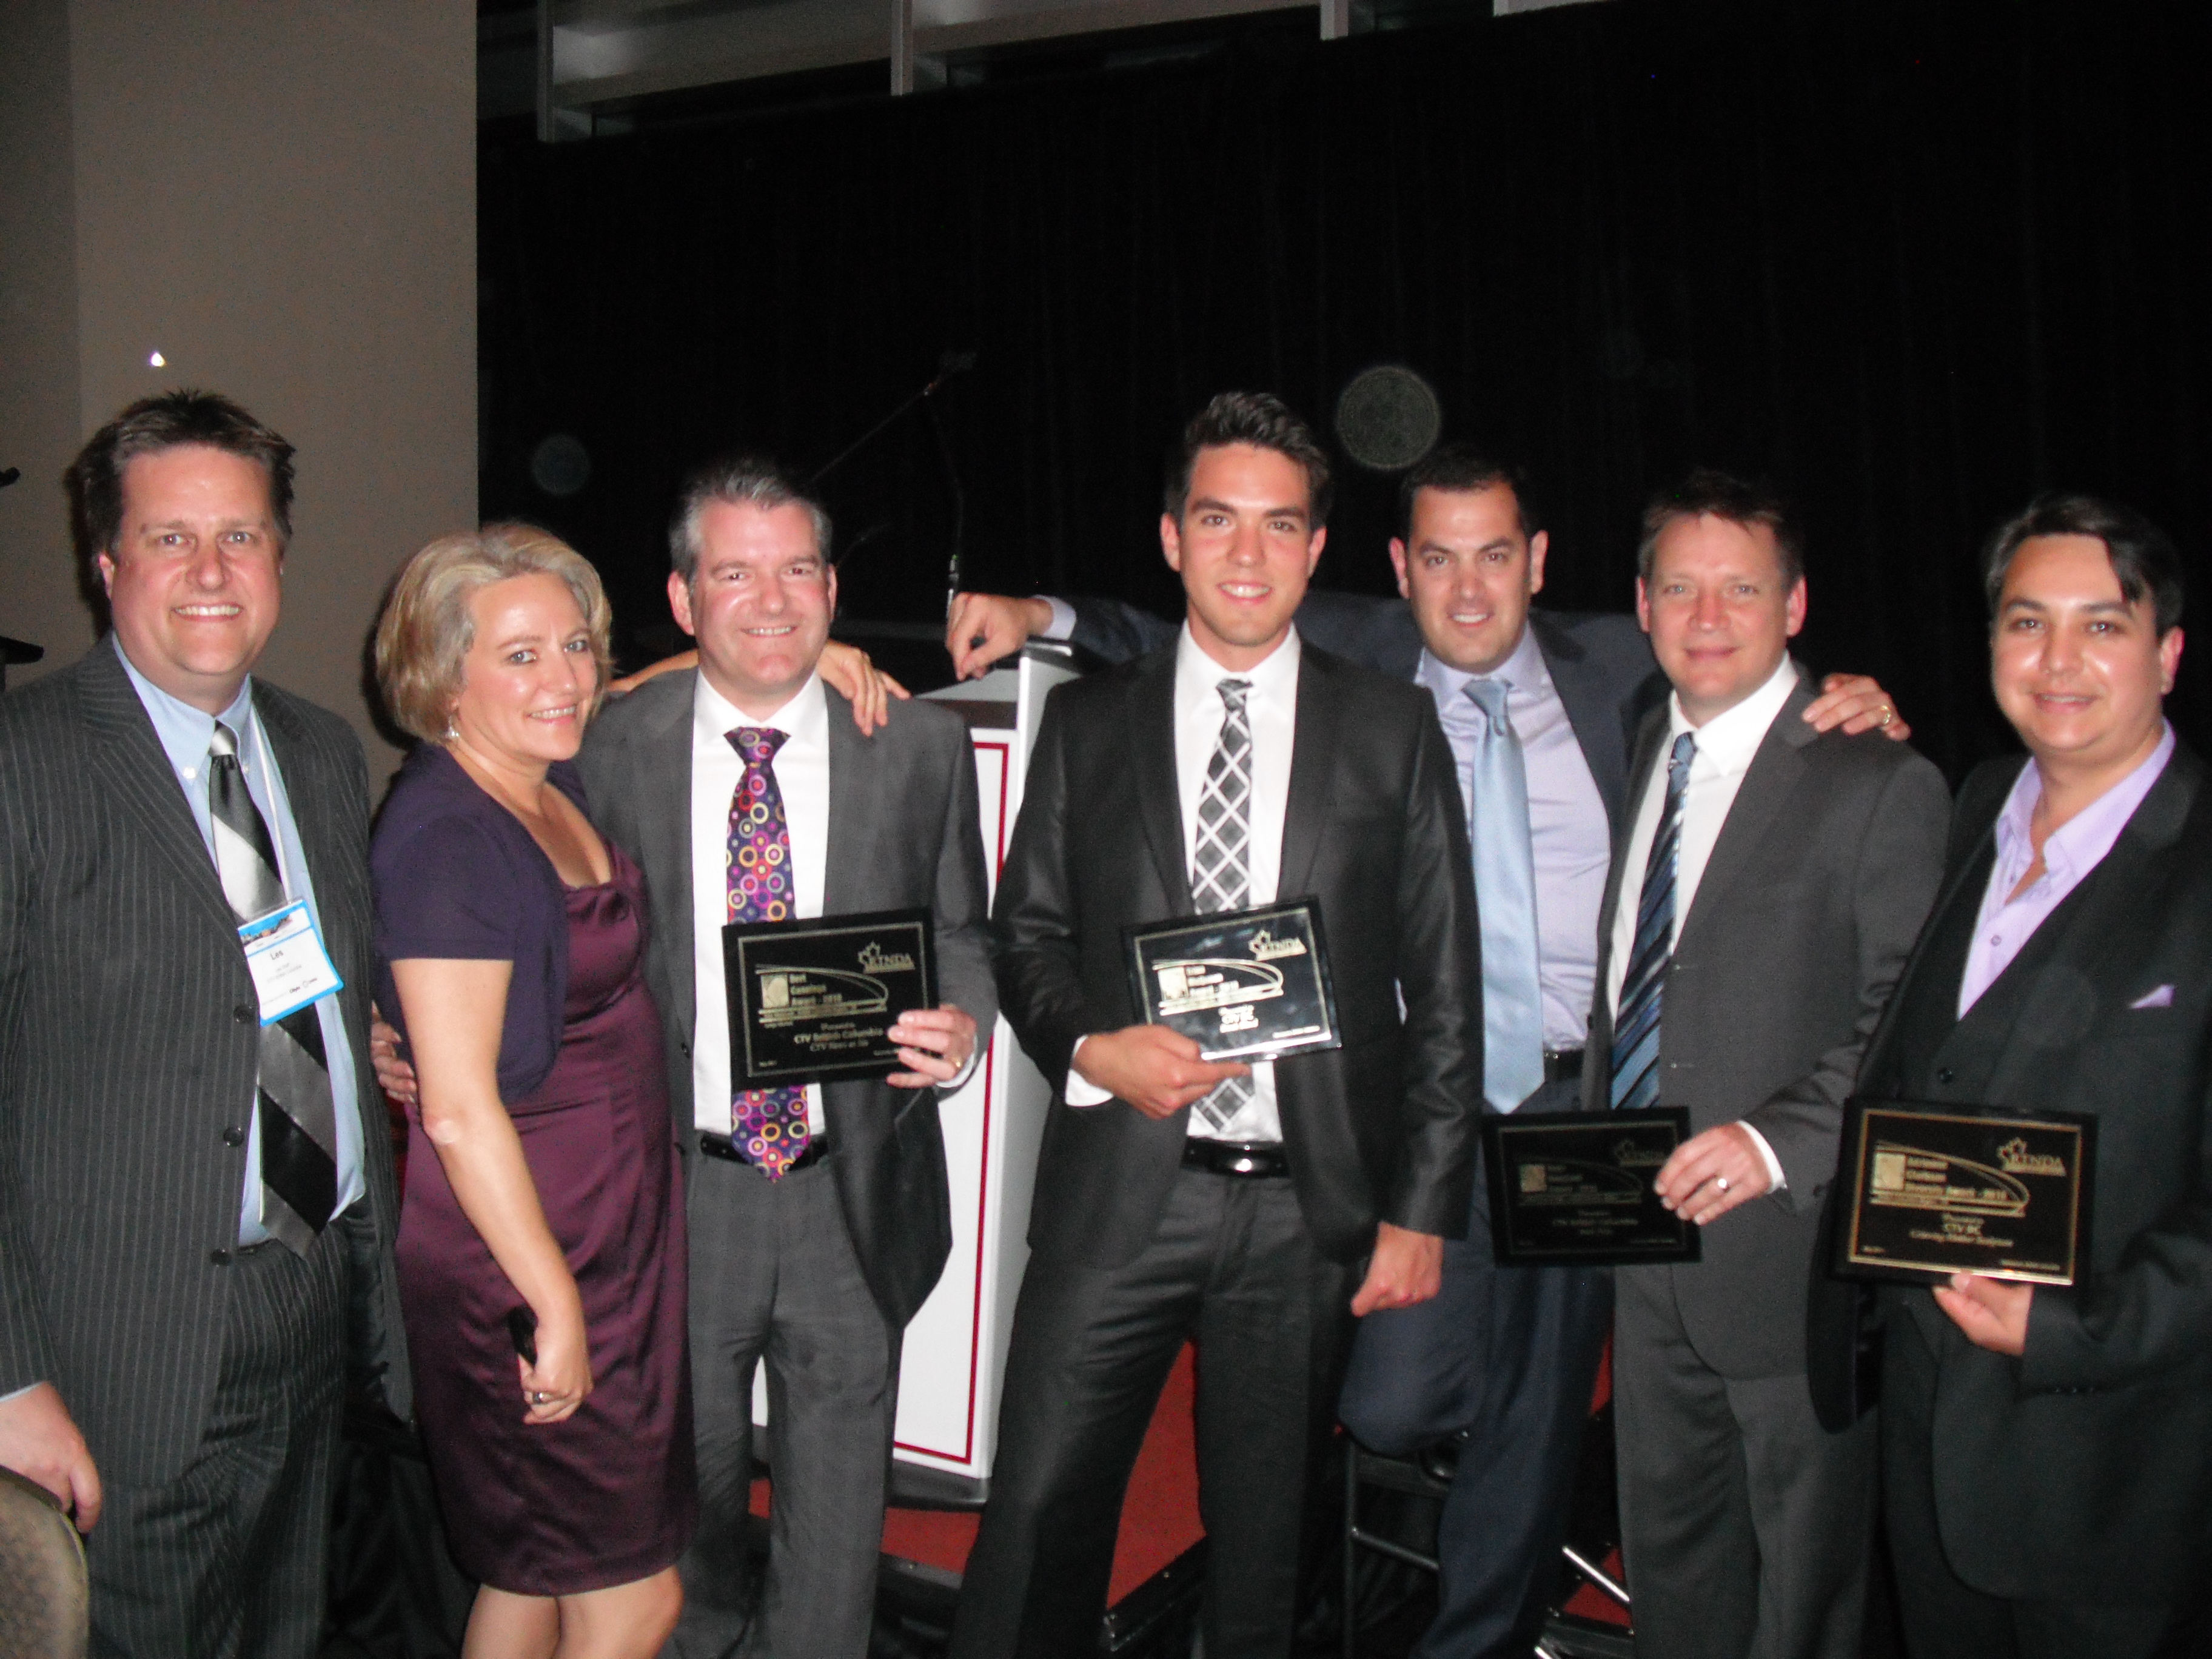 Kelvin with much of the CTV BC team at the RTDNA Awards 2011